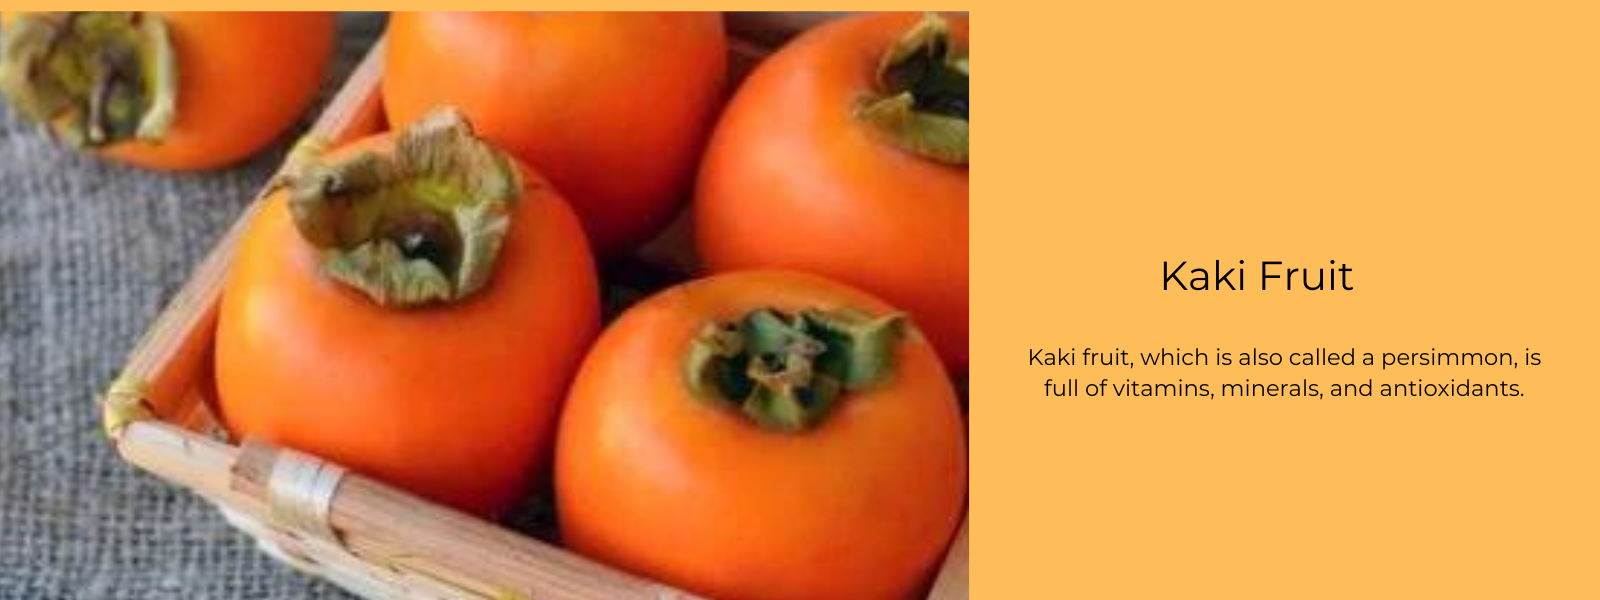 What is Kaki? A Note on Persimmon/Sharon Fruit